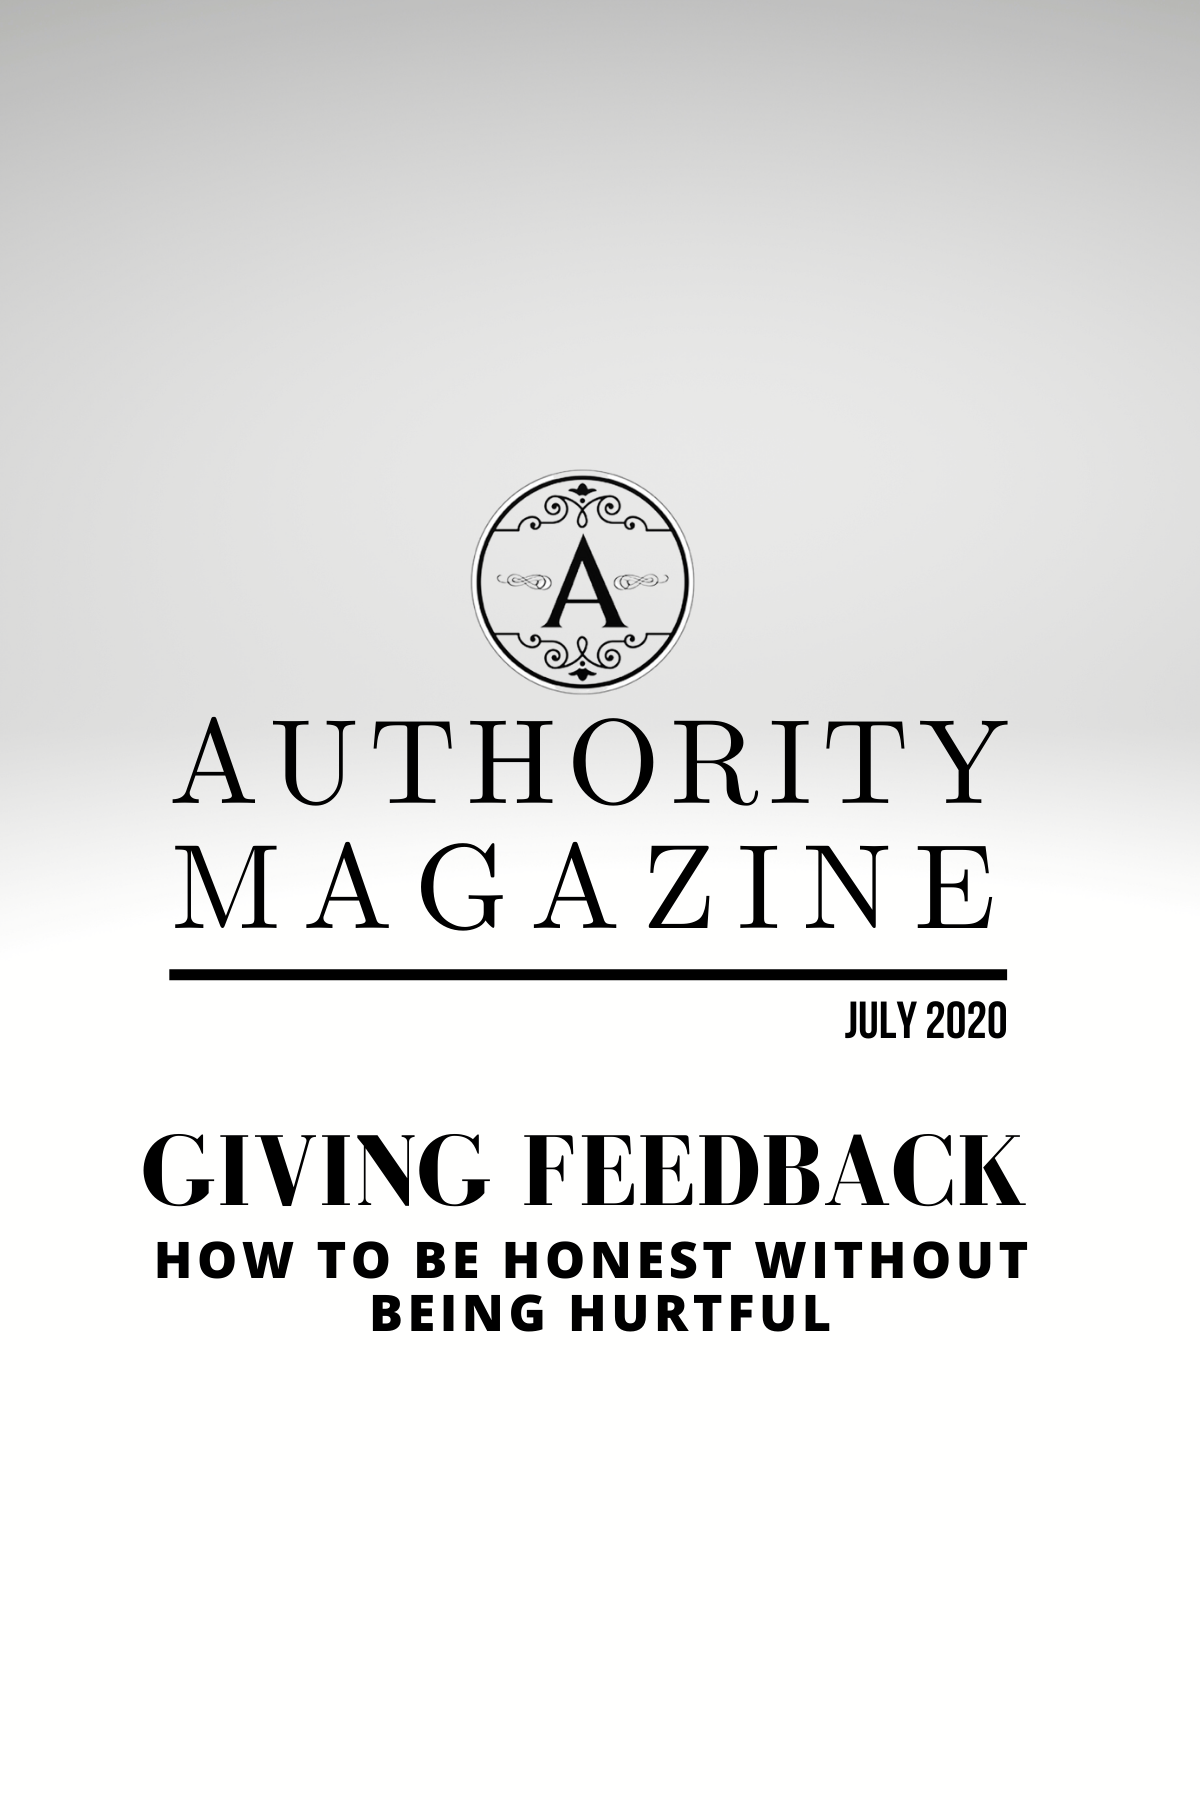 Authority Magazine - Giving Feedback how to be honest without being hurtful feature image